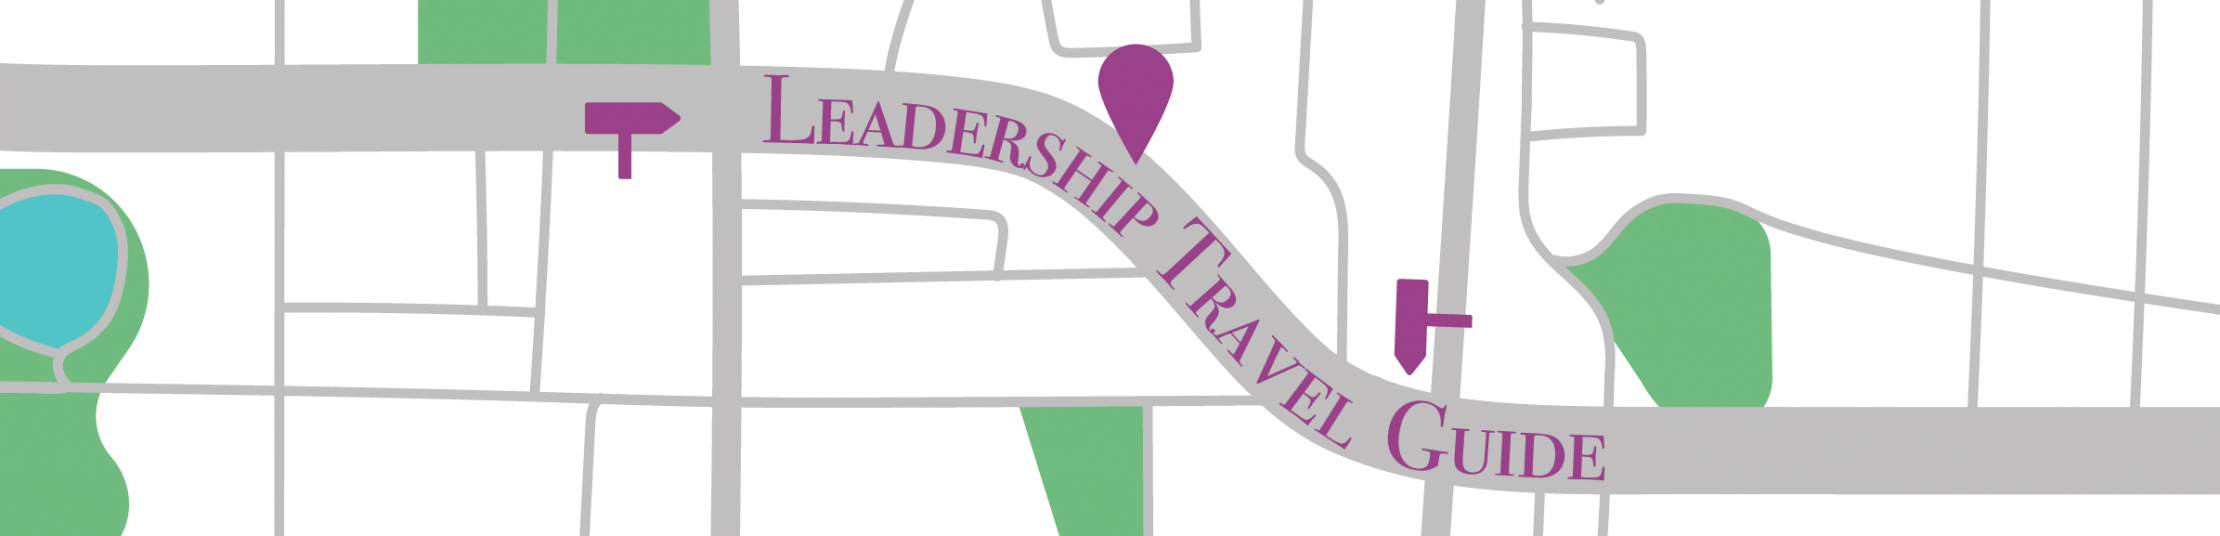 The Leadership Travel Guide